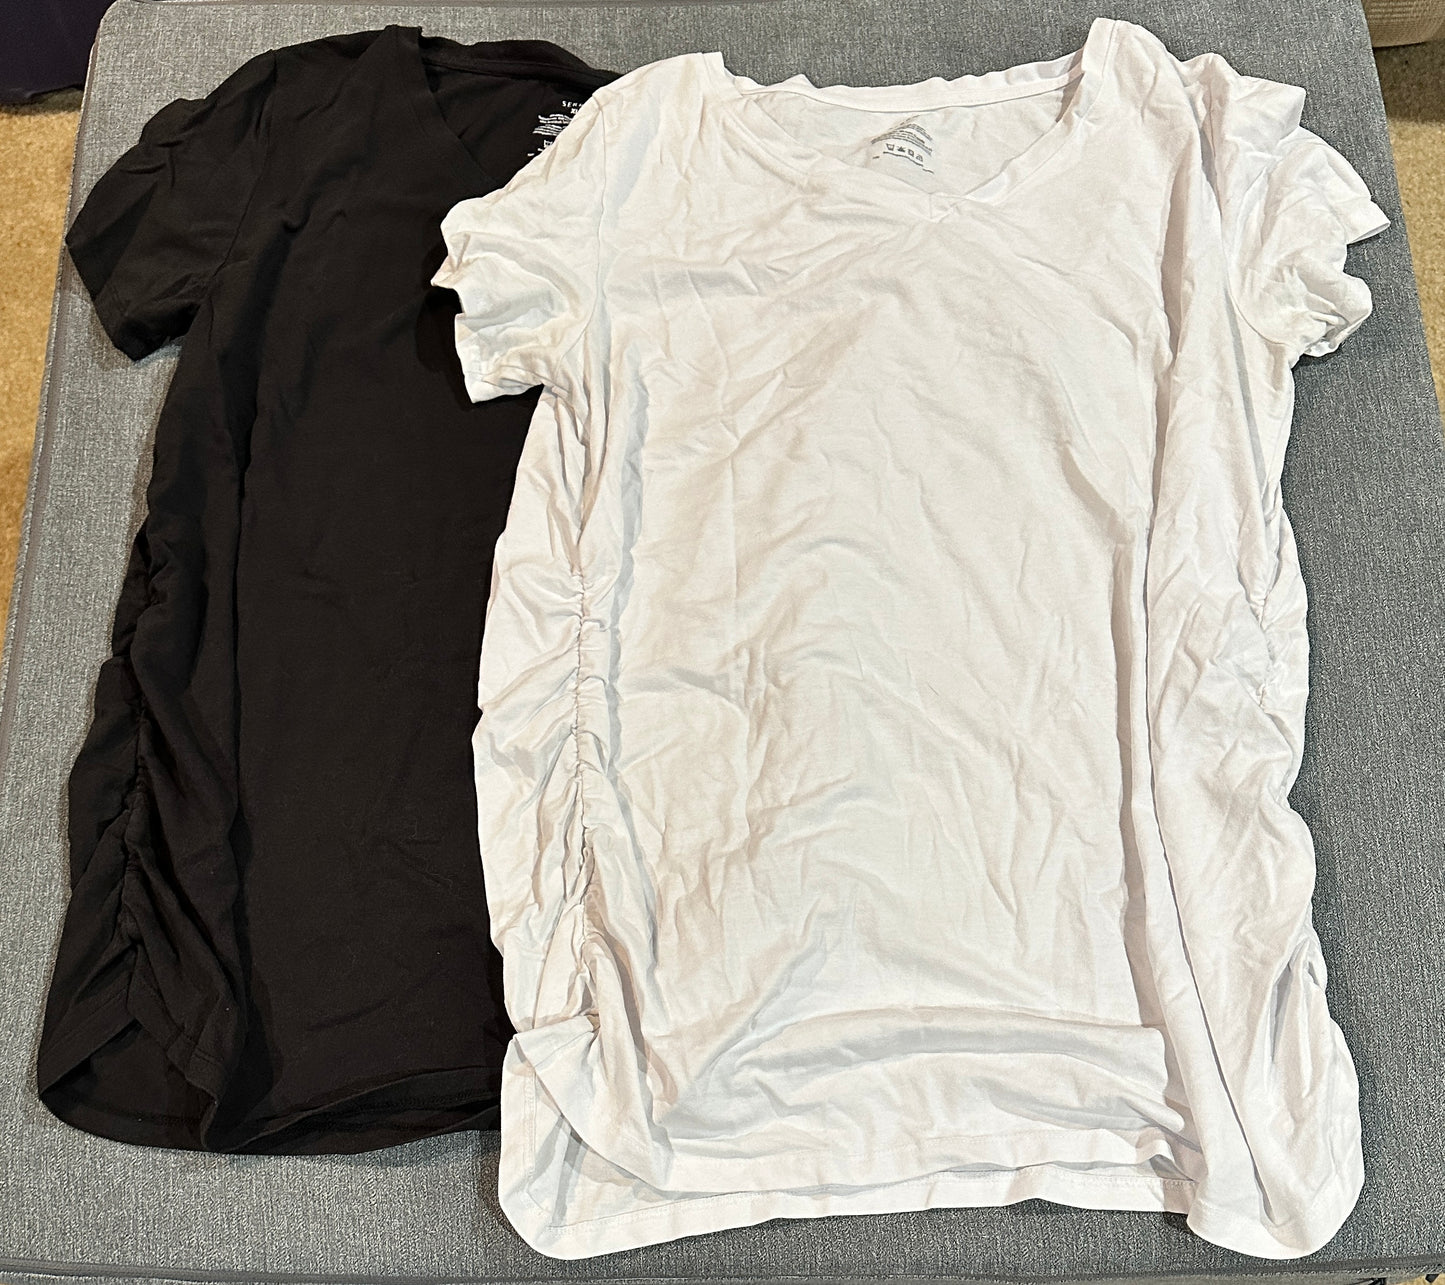 XL pair of black and white maternity shirts